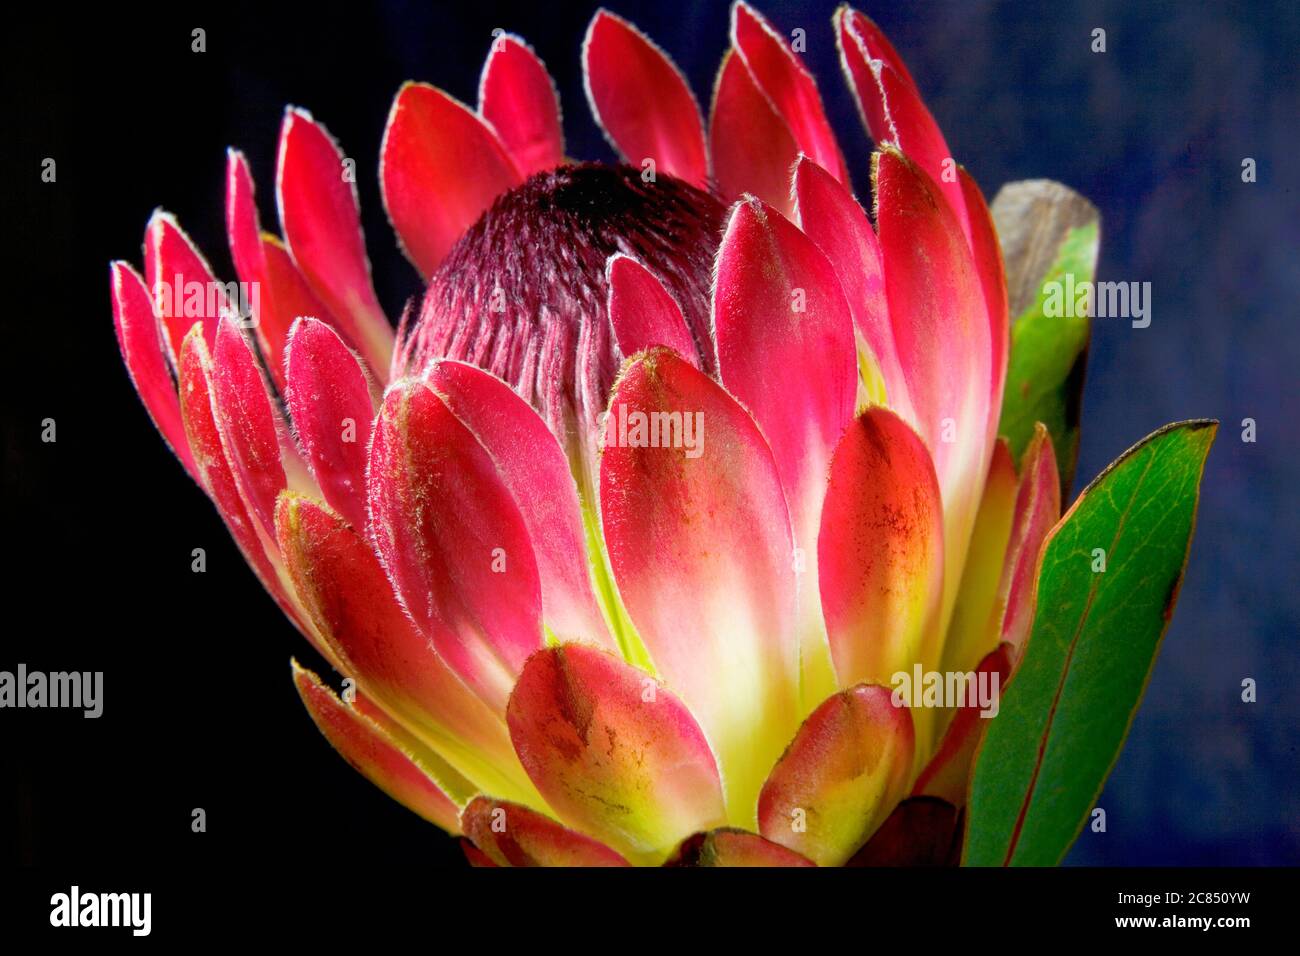 pink protea flower, isolated on grunge dark background, close up Stock Photo